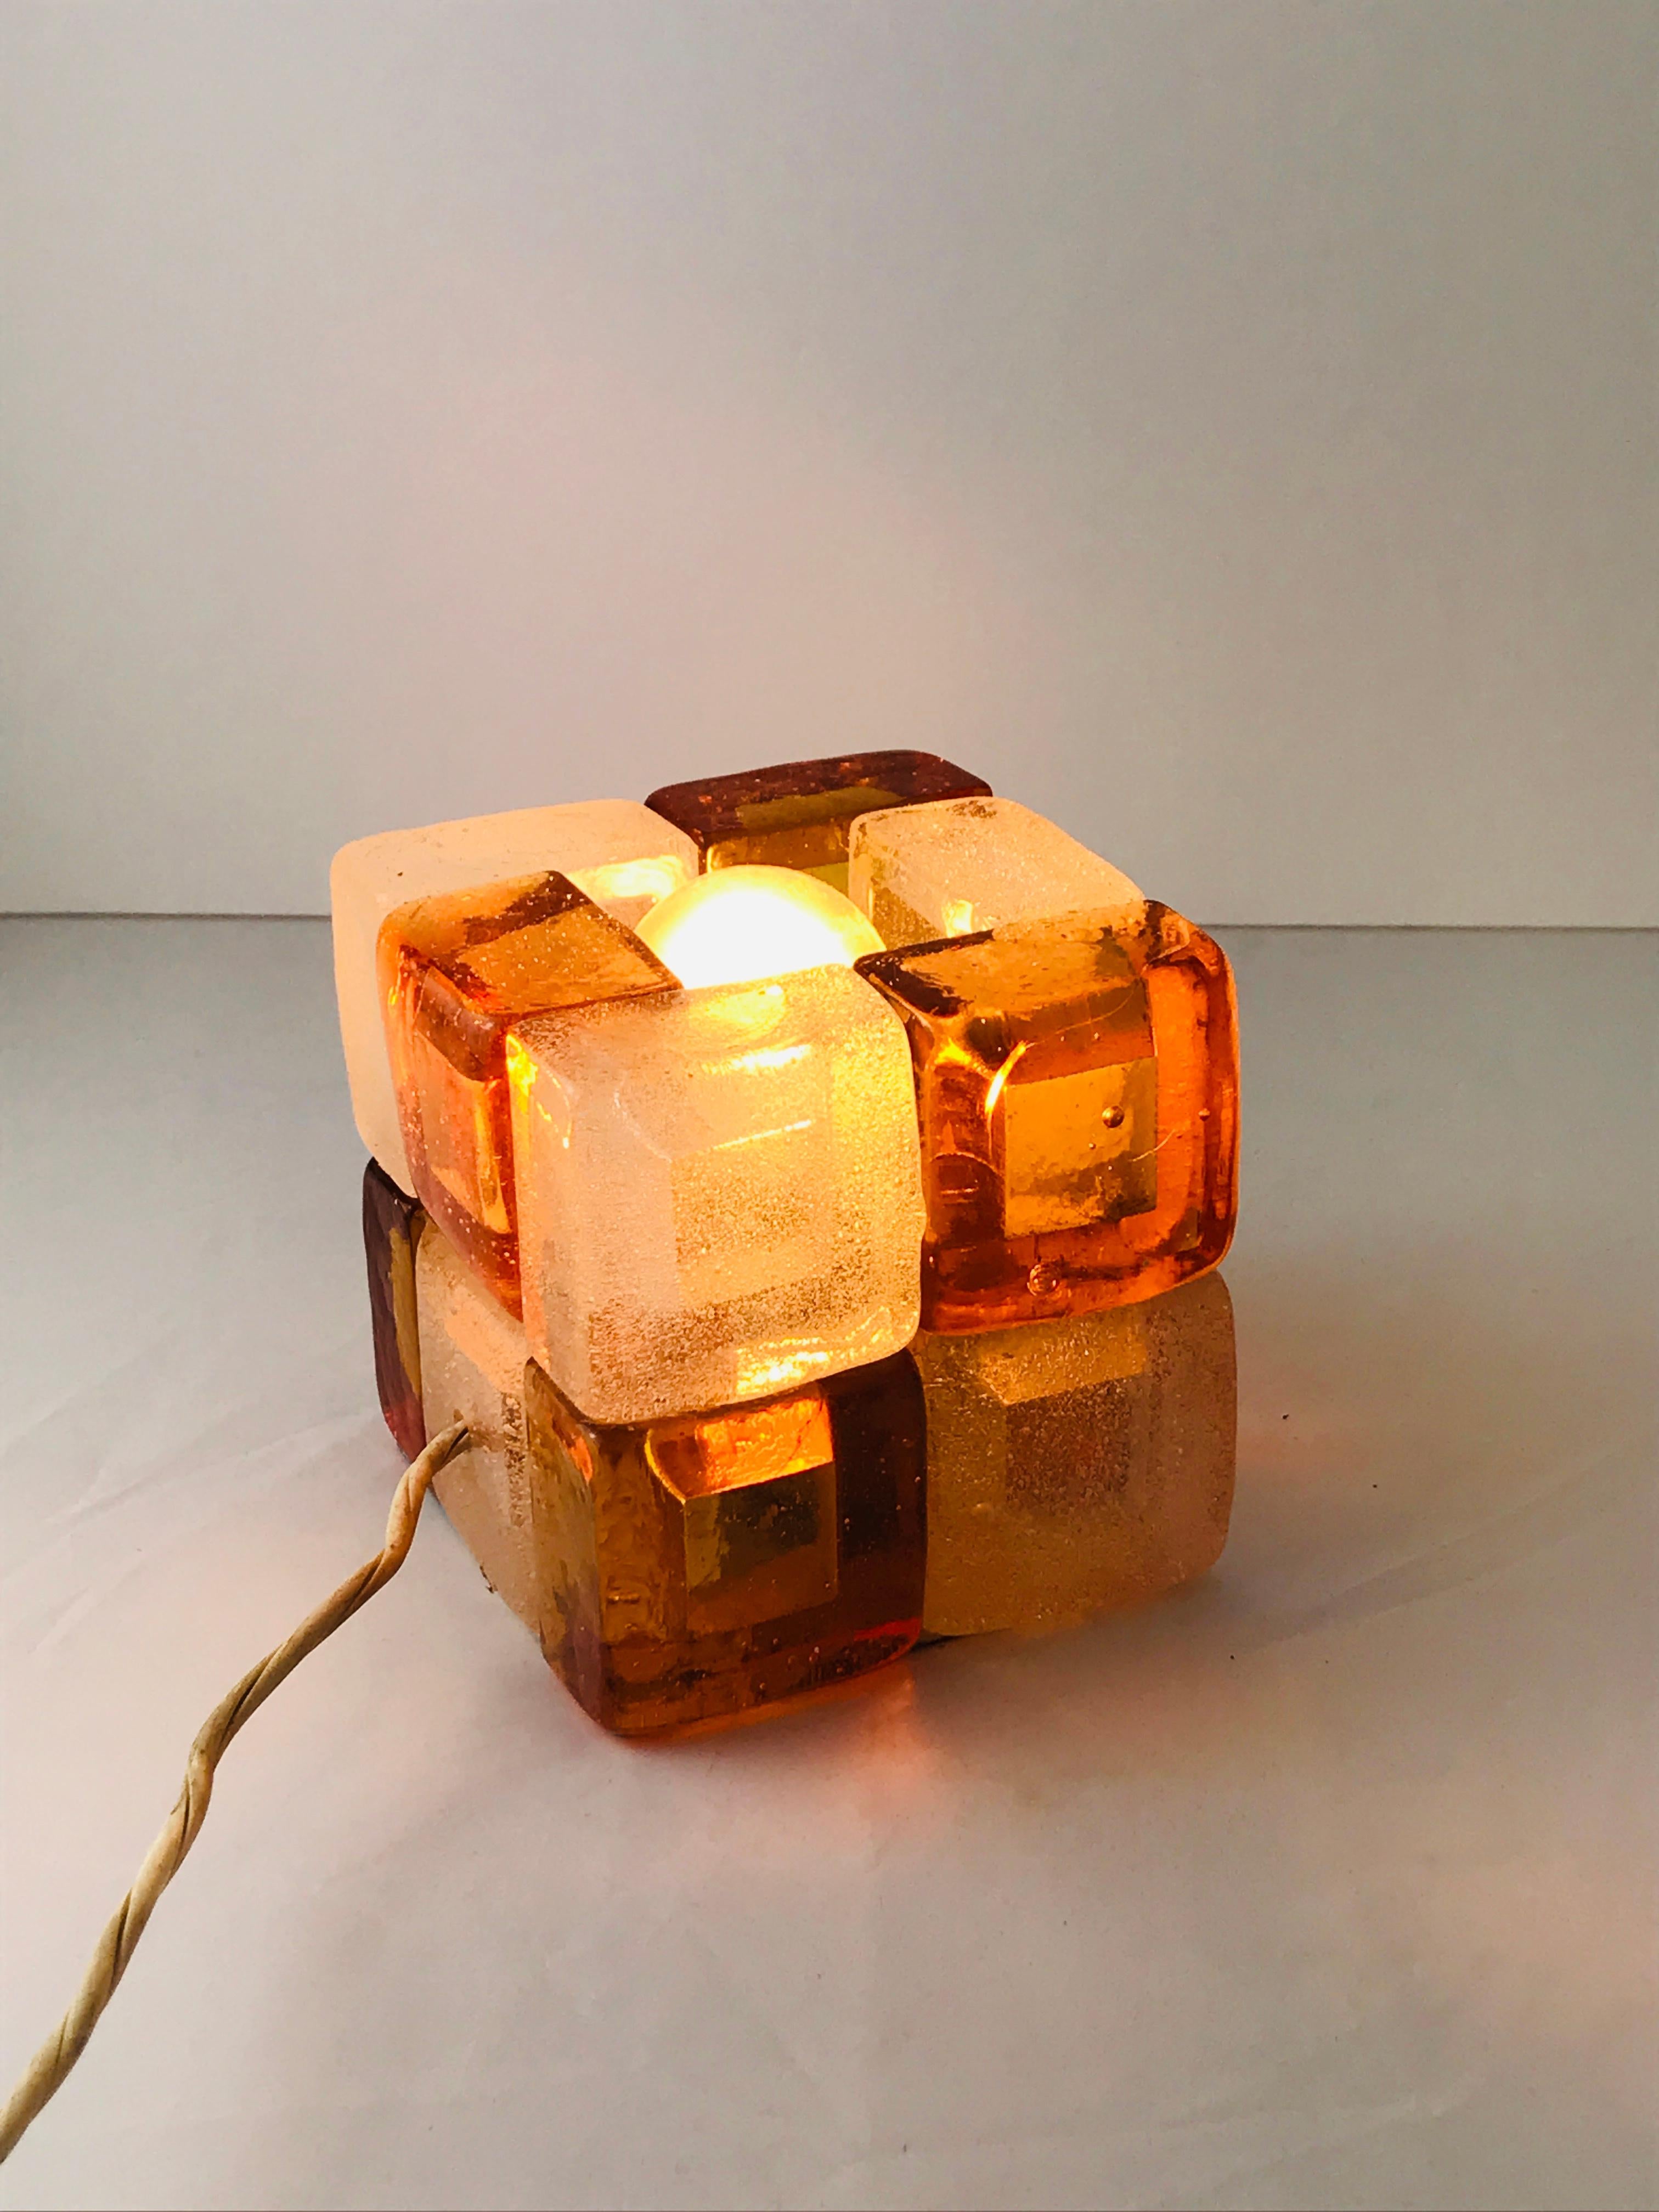 Albano Poli cube lamp in orange and white Murano glass, 1960s, Italy.
Good condition beautiful on a bed side table.
 